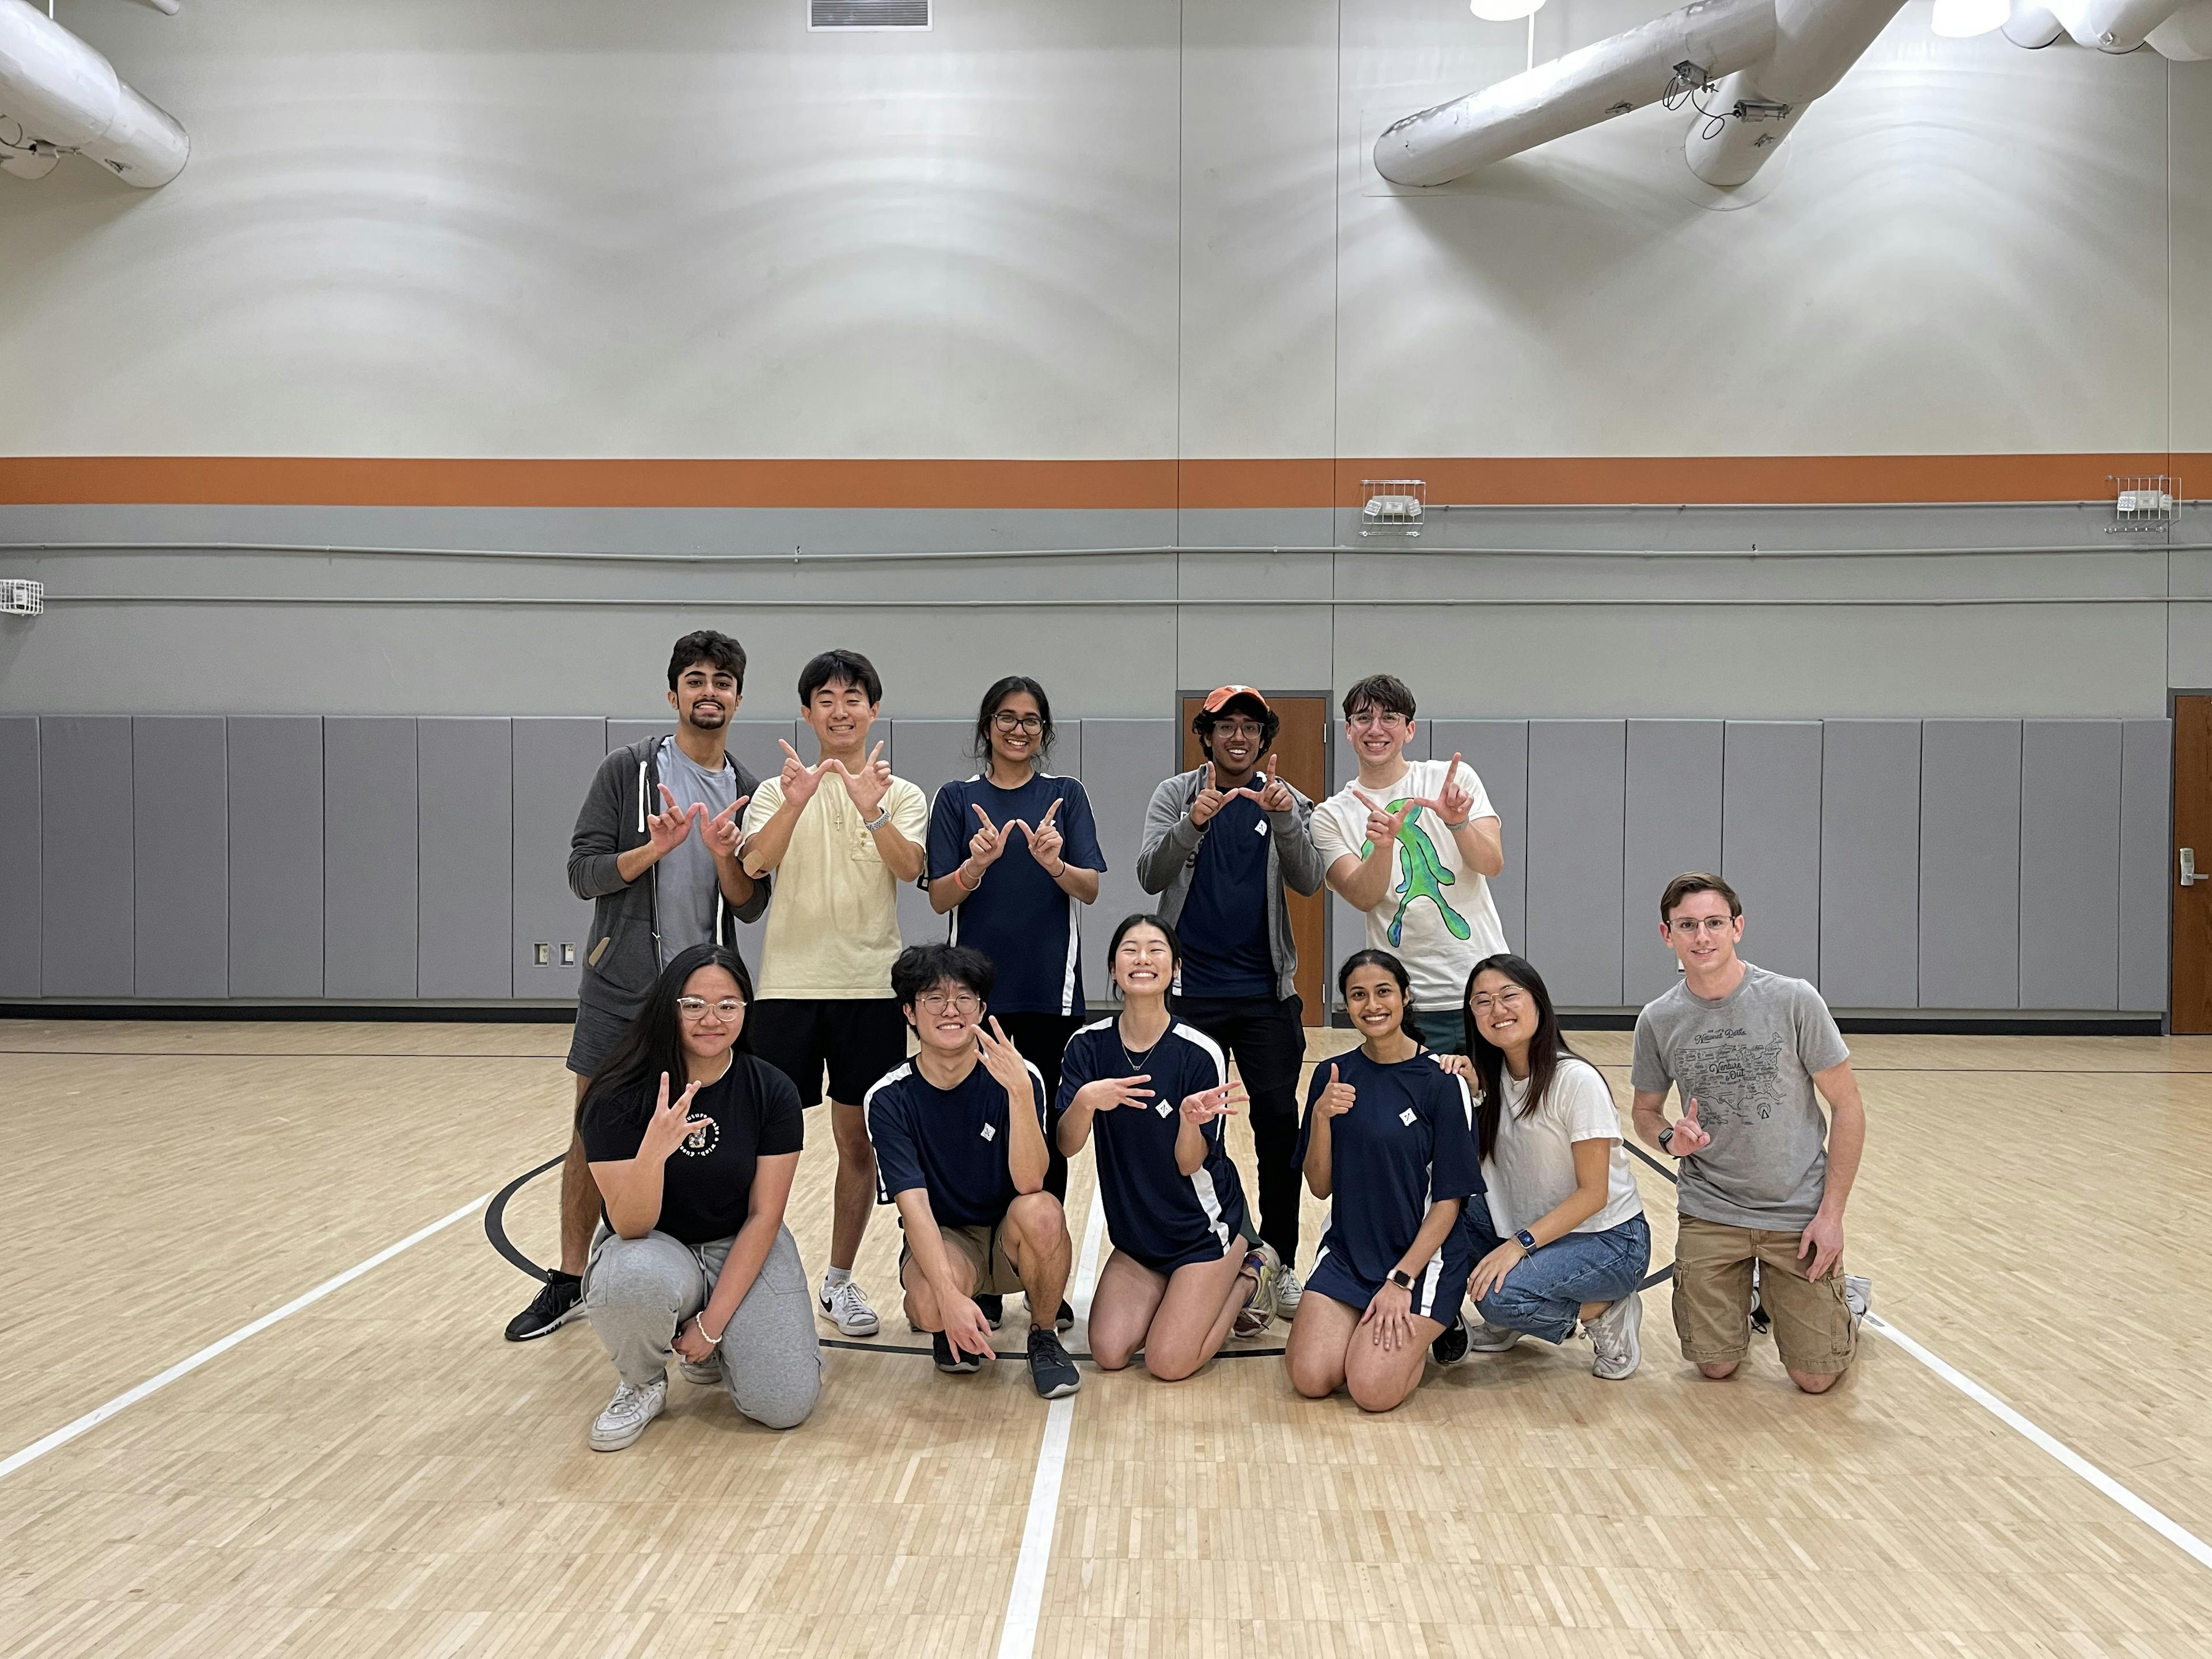 Group photo of IEEE members in uniform on court after a dodgeball game